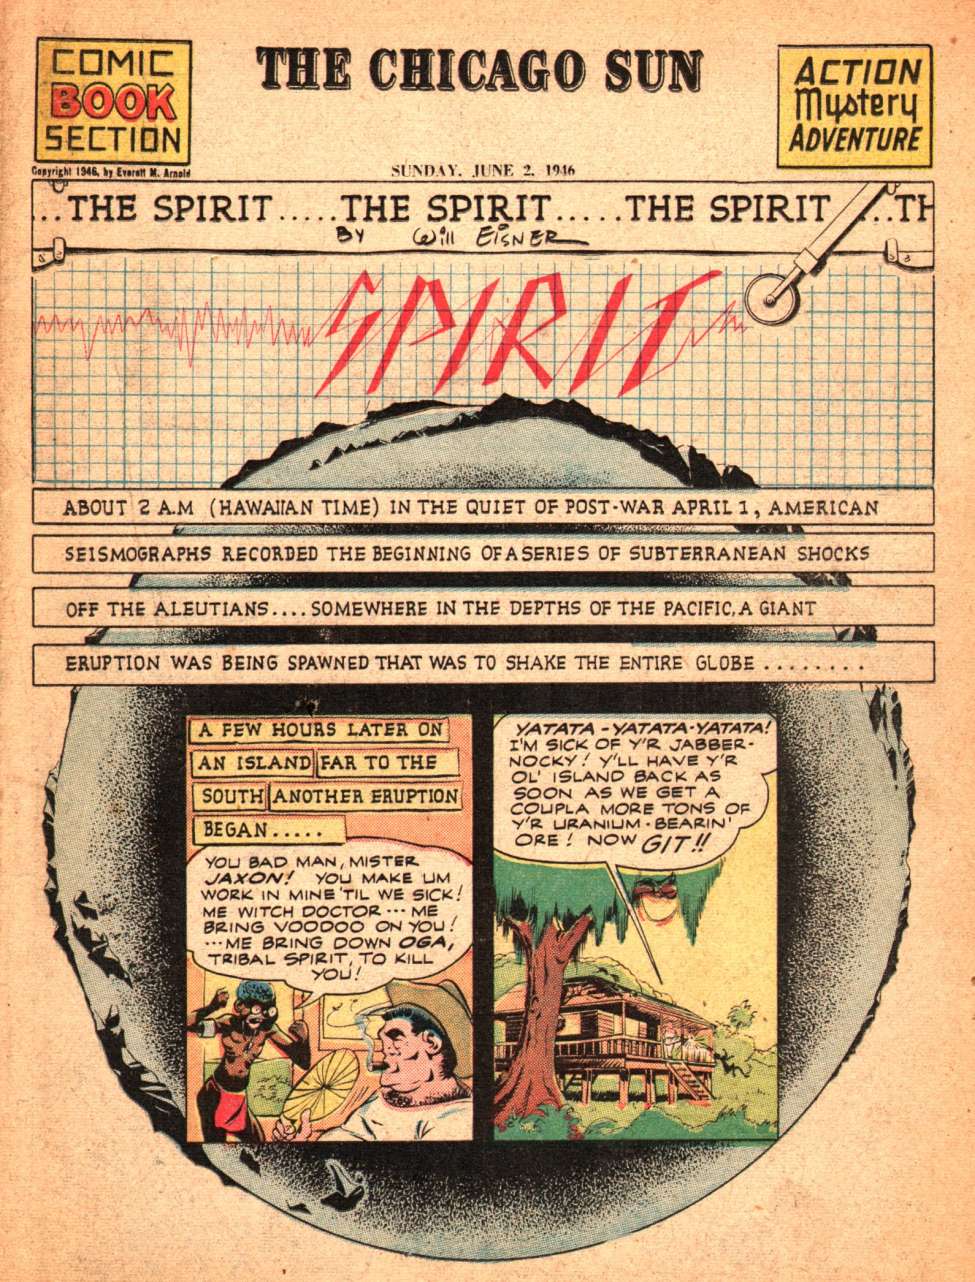 Book Cover For The Spirit (1946-06-02) - Chicago Sun